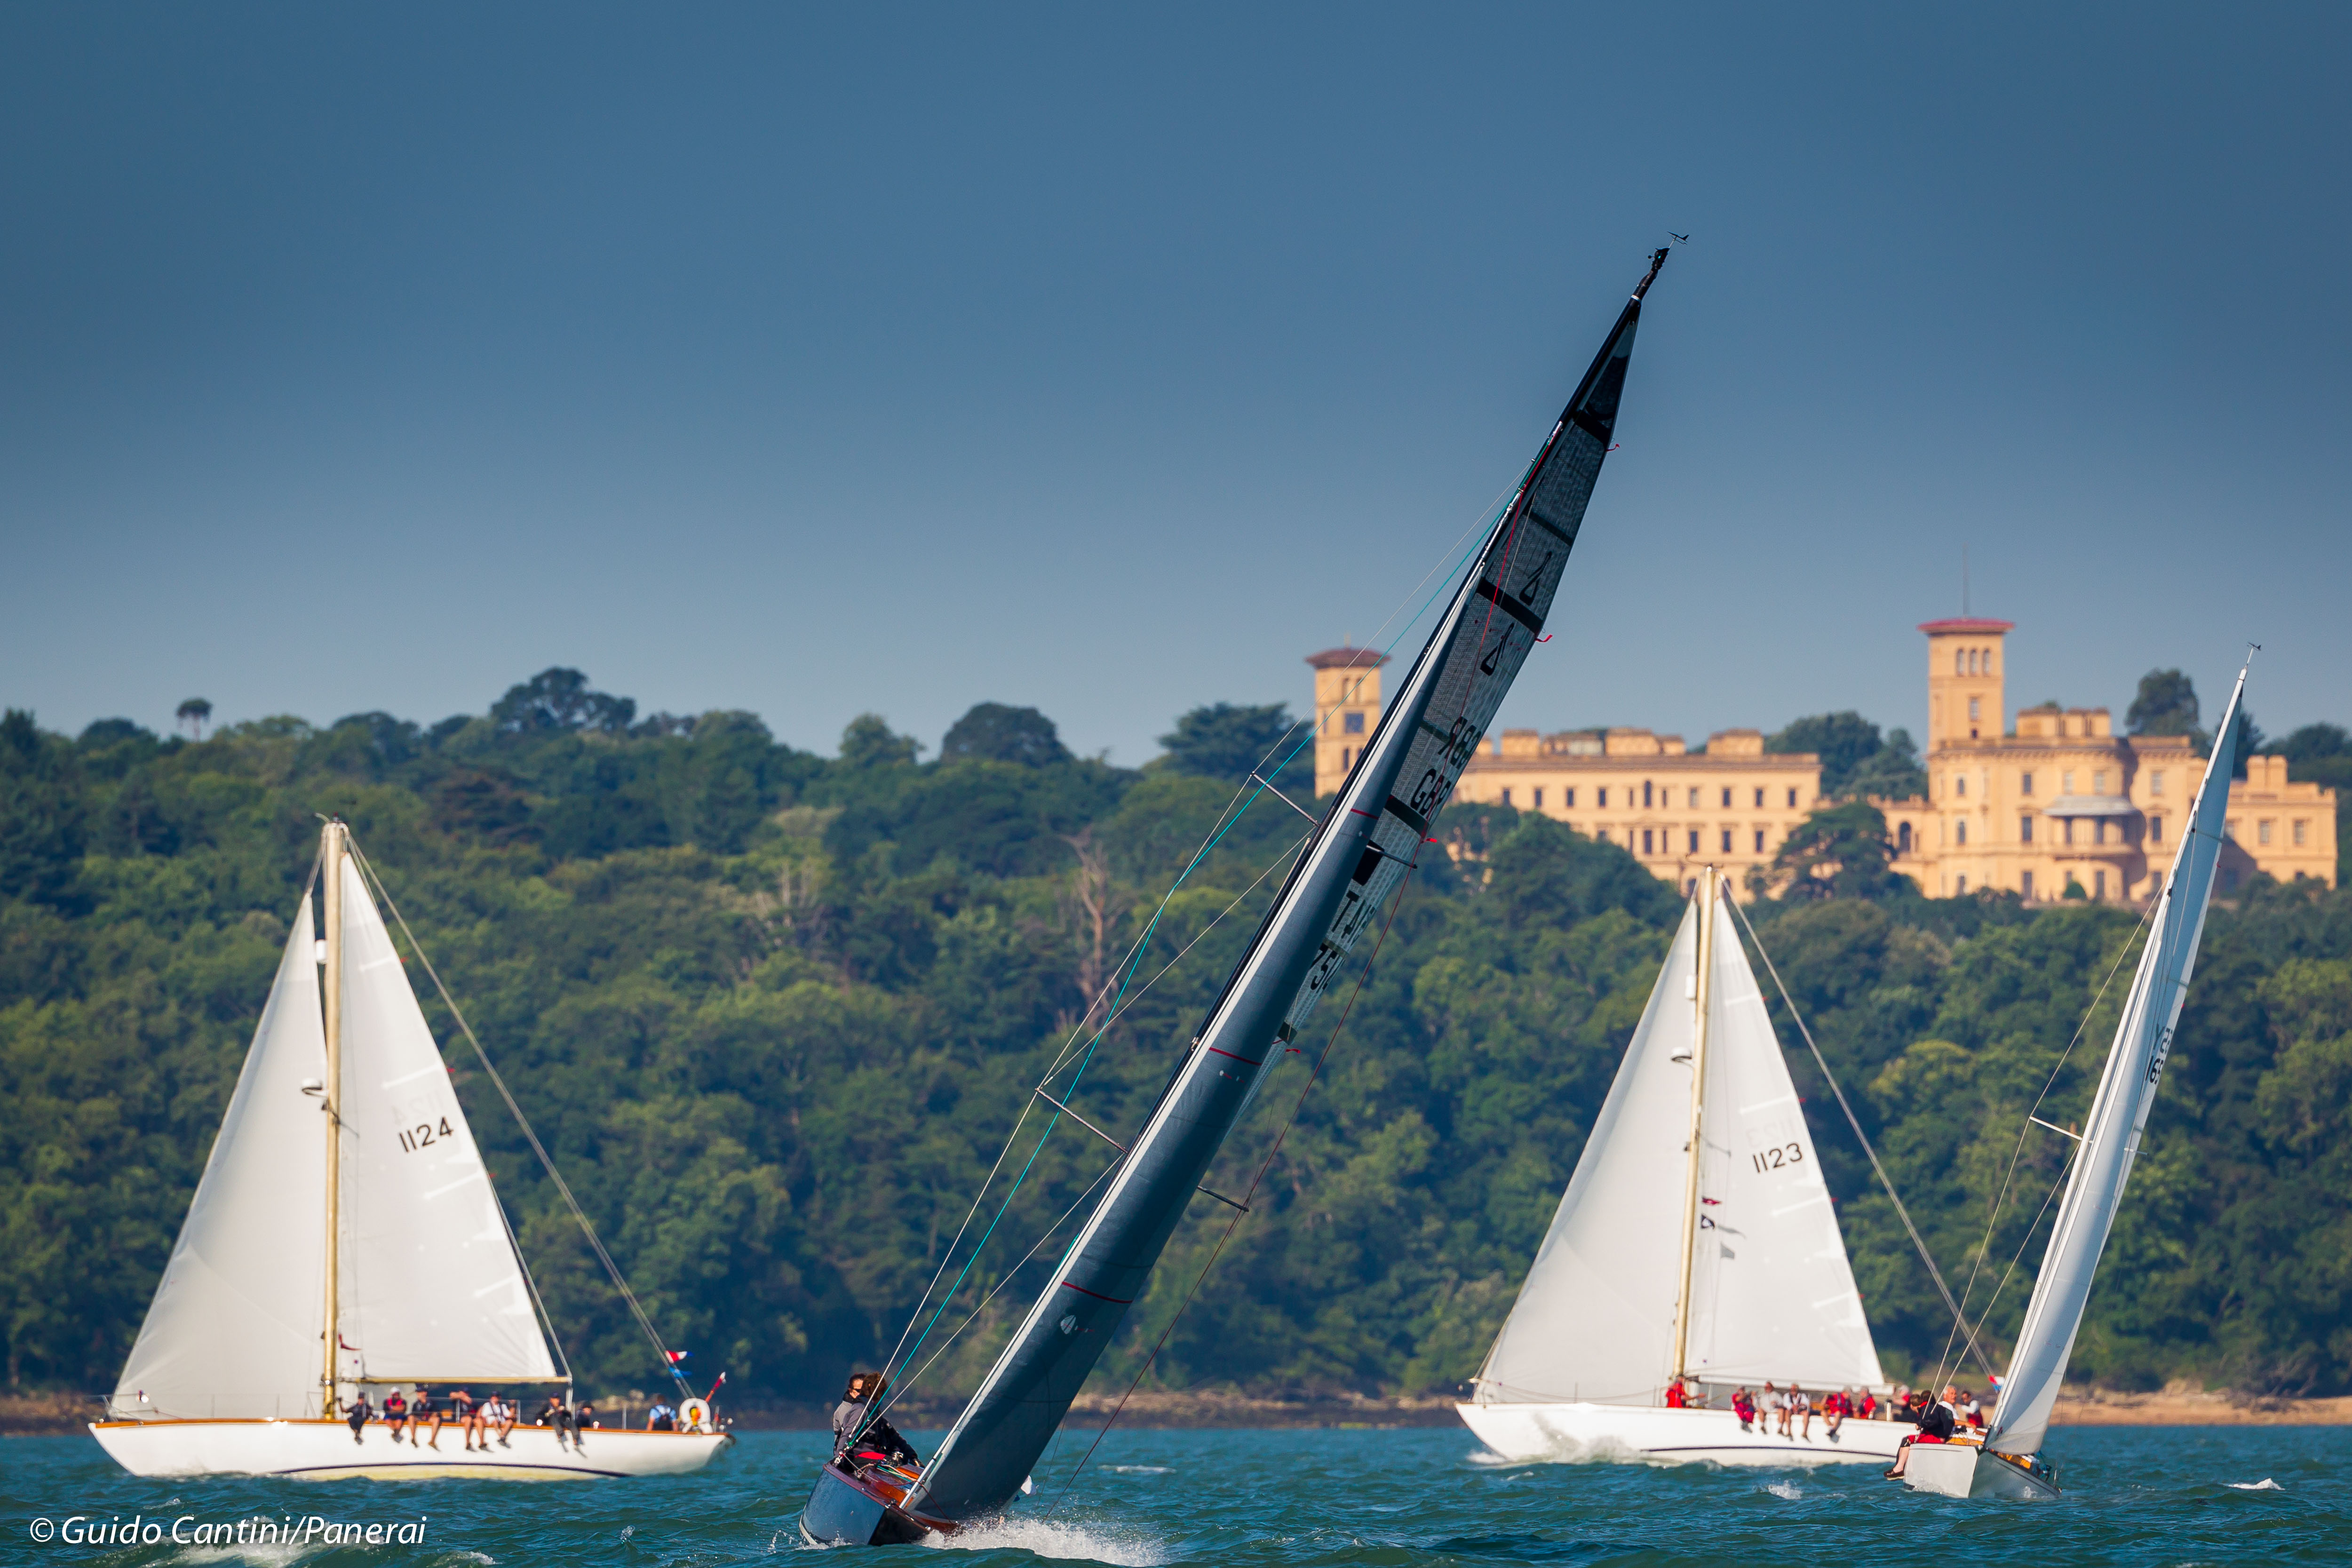 Image of Yachts starting from RYS Cowes. photo credit Guido Cantini